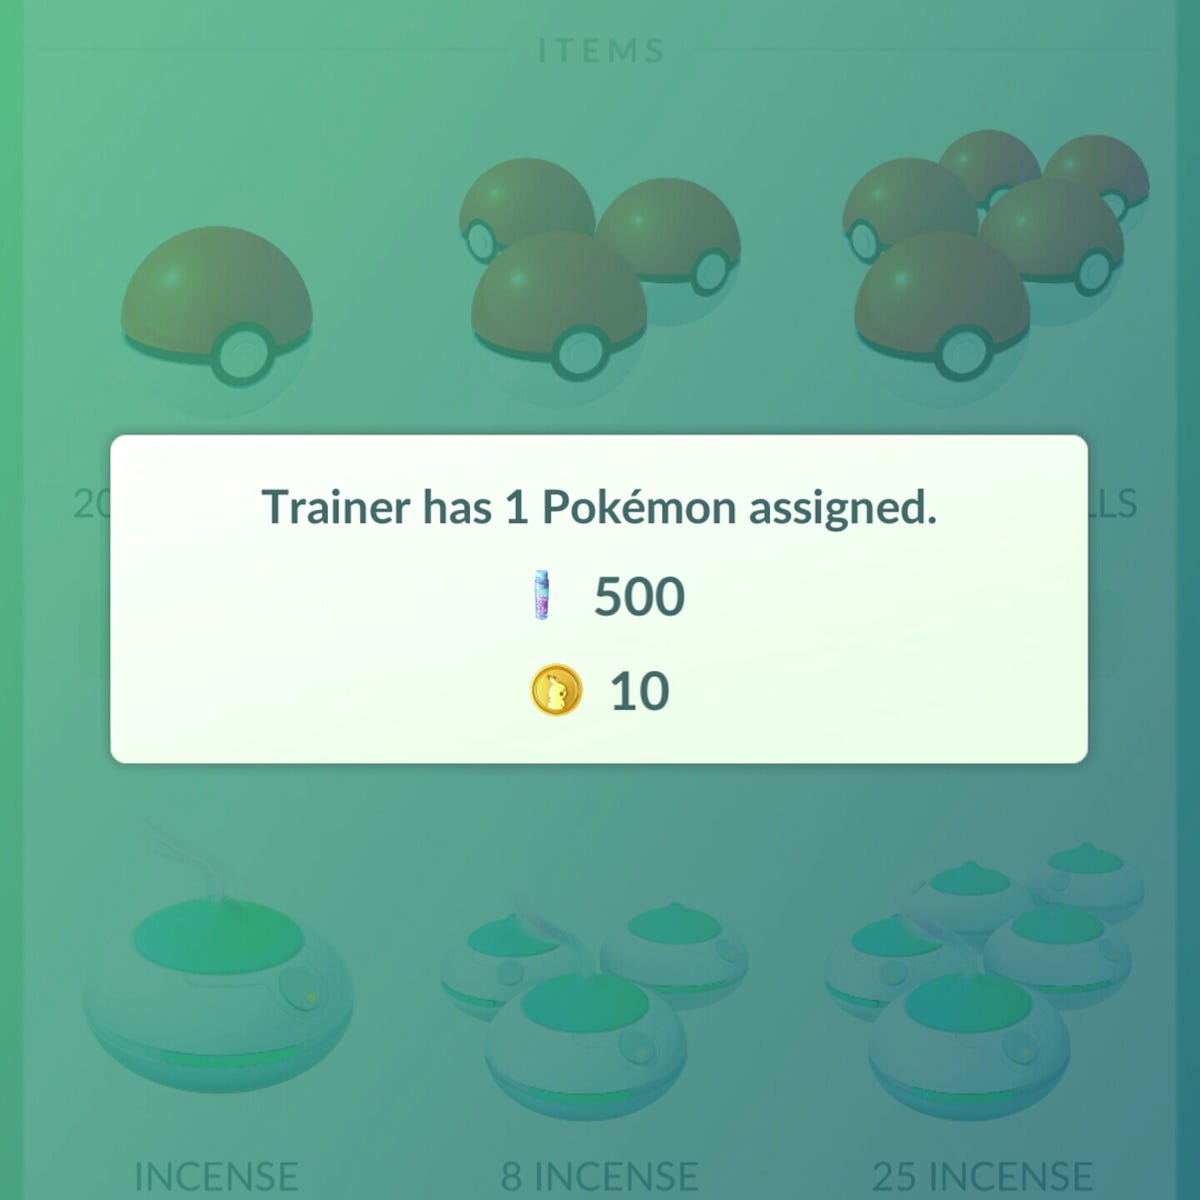 How to Get Coins in Pokémon GO